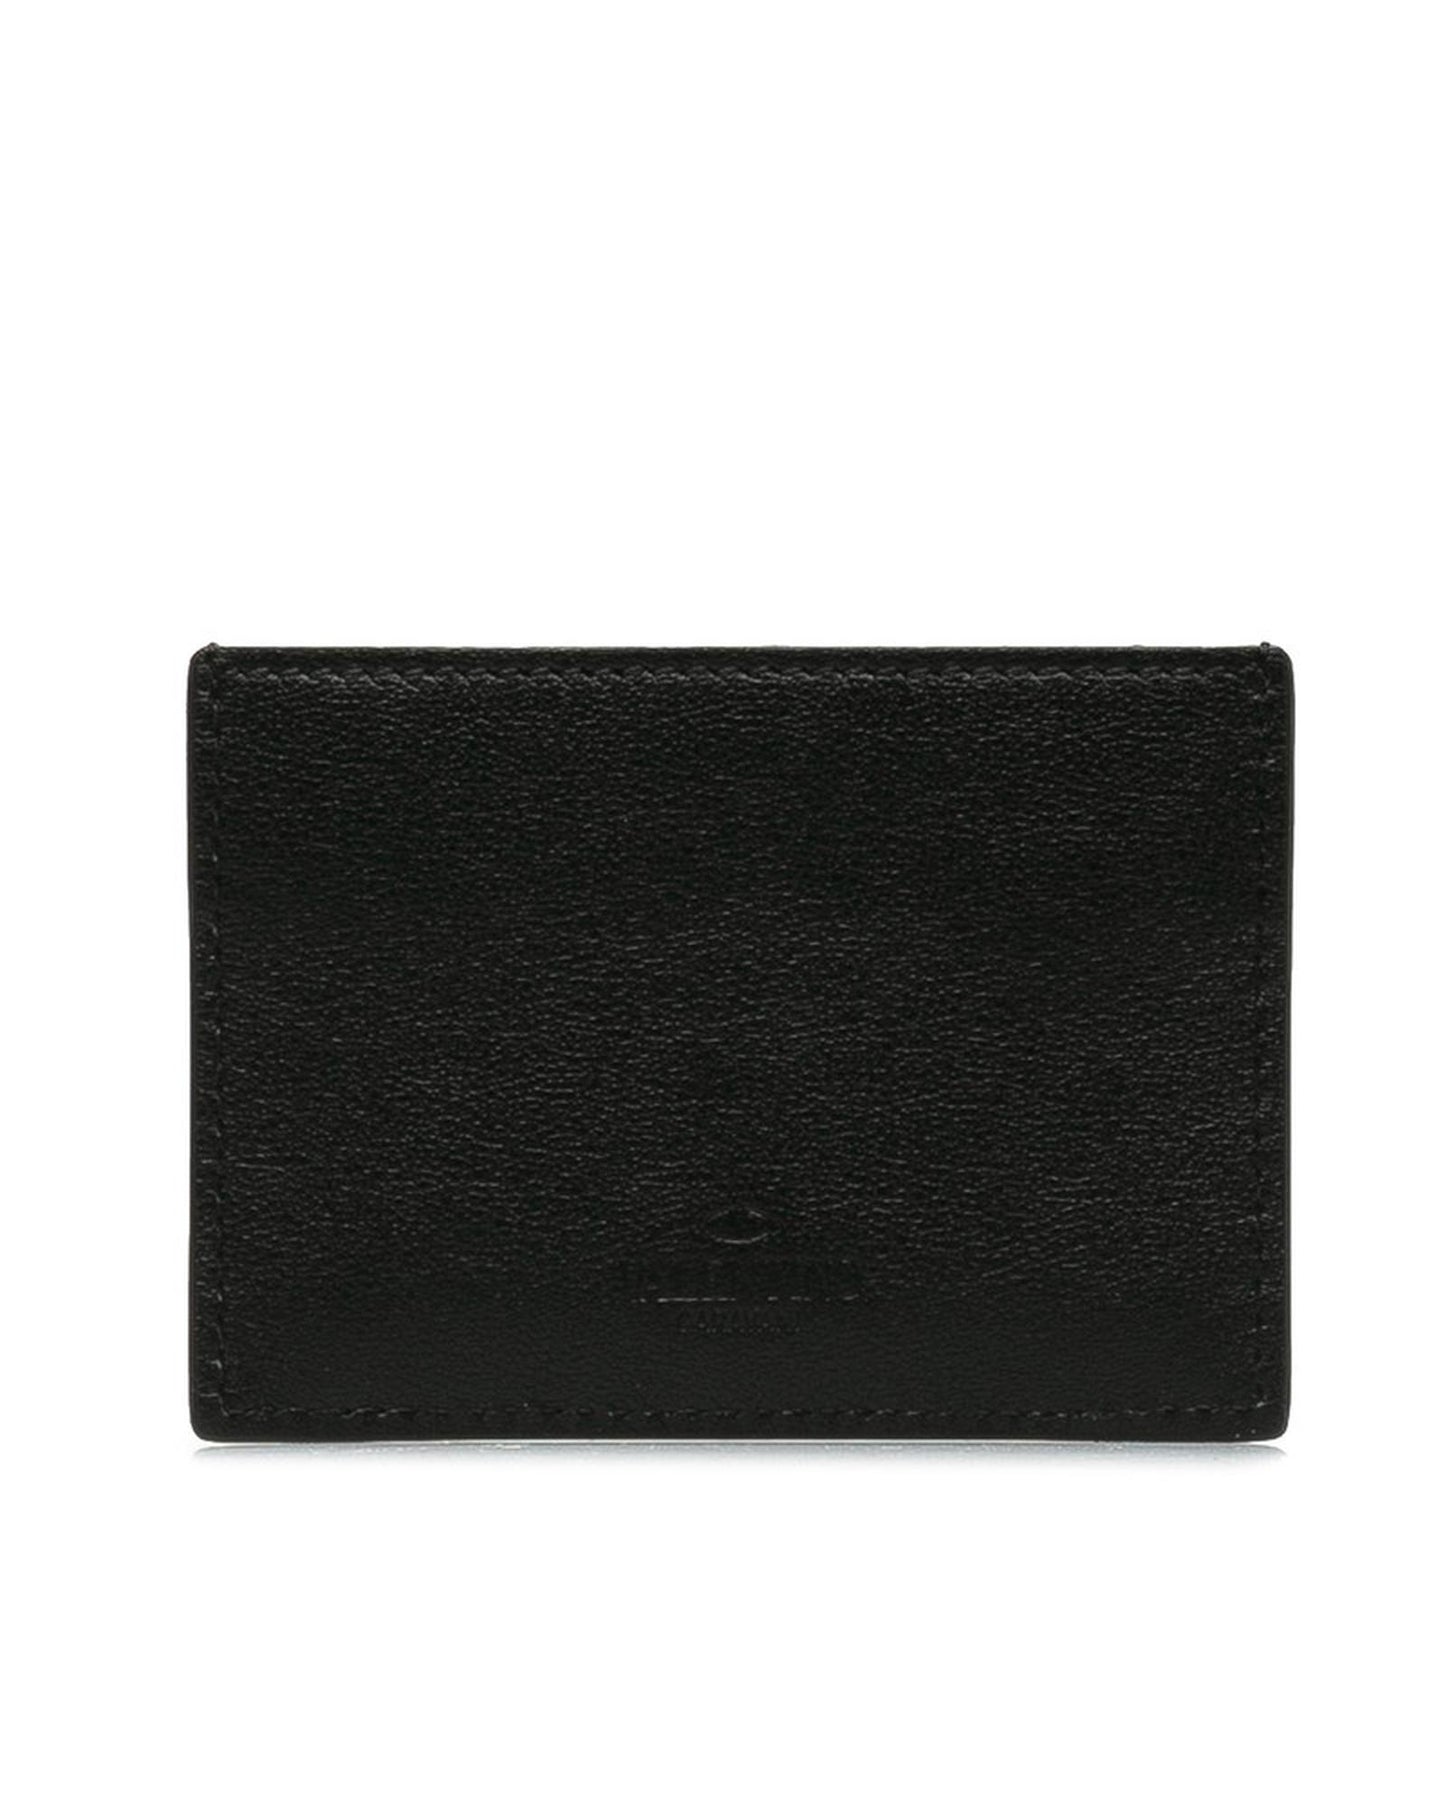 Valentino Women's Black Leather Card Holder Wallet with Stud Detailing in Black